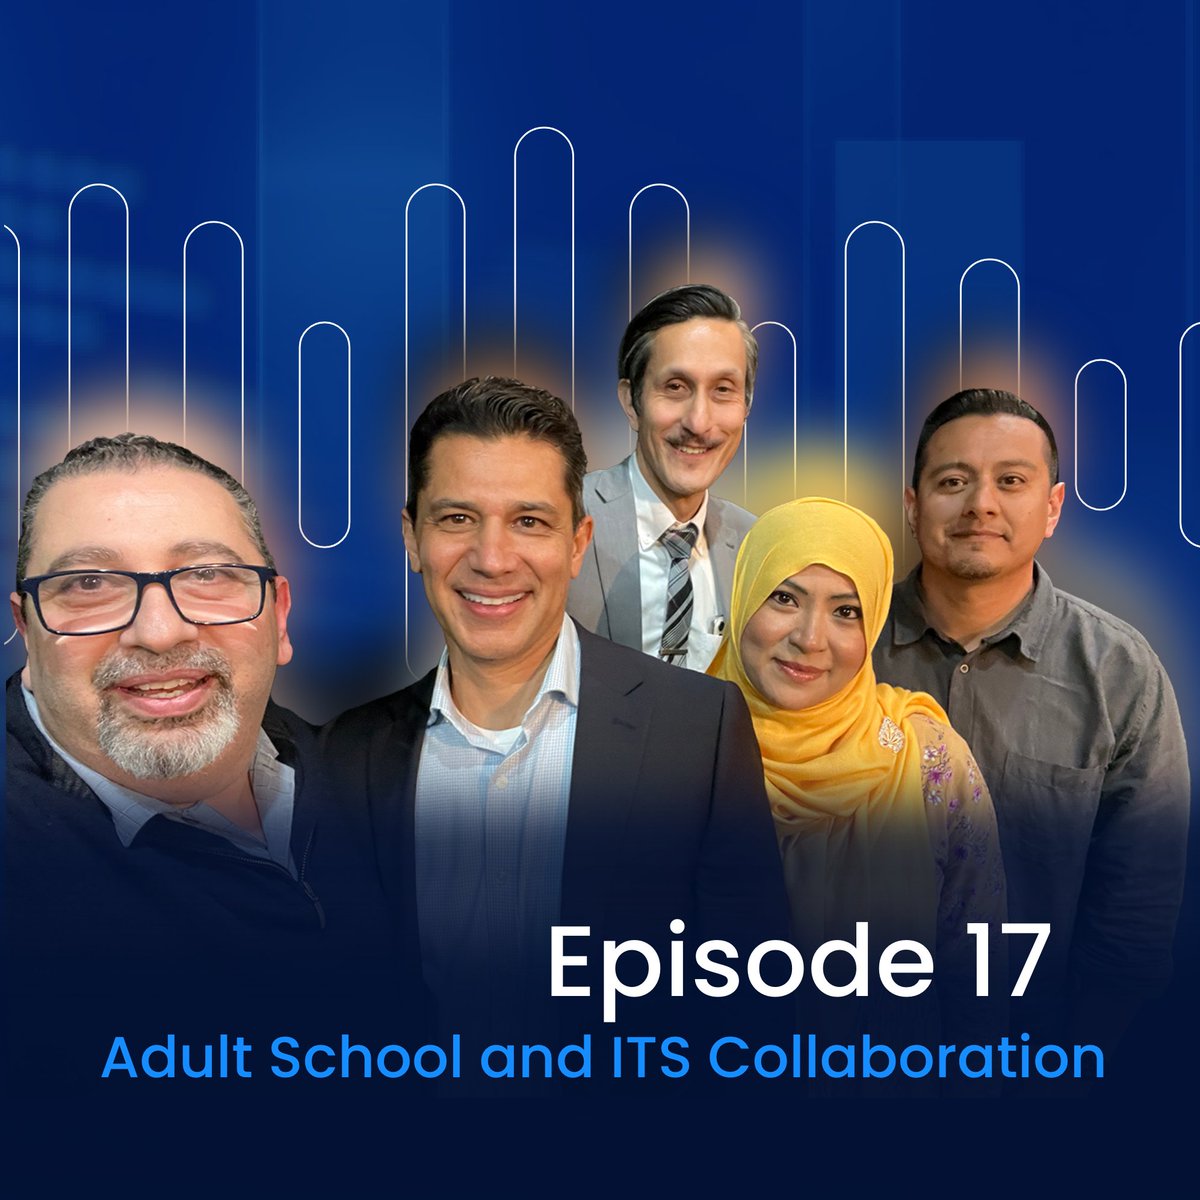 New Podcast Alert! Come listen in on the collaboration with LA Unified Adult Education and ITS! #podcast #its #informationtechnology #it #cyber #cybersecurity #cybersecuritytraining